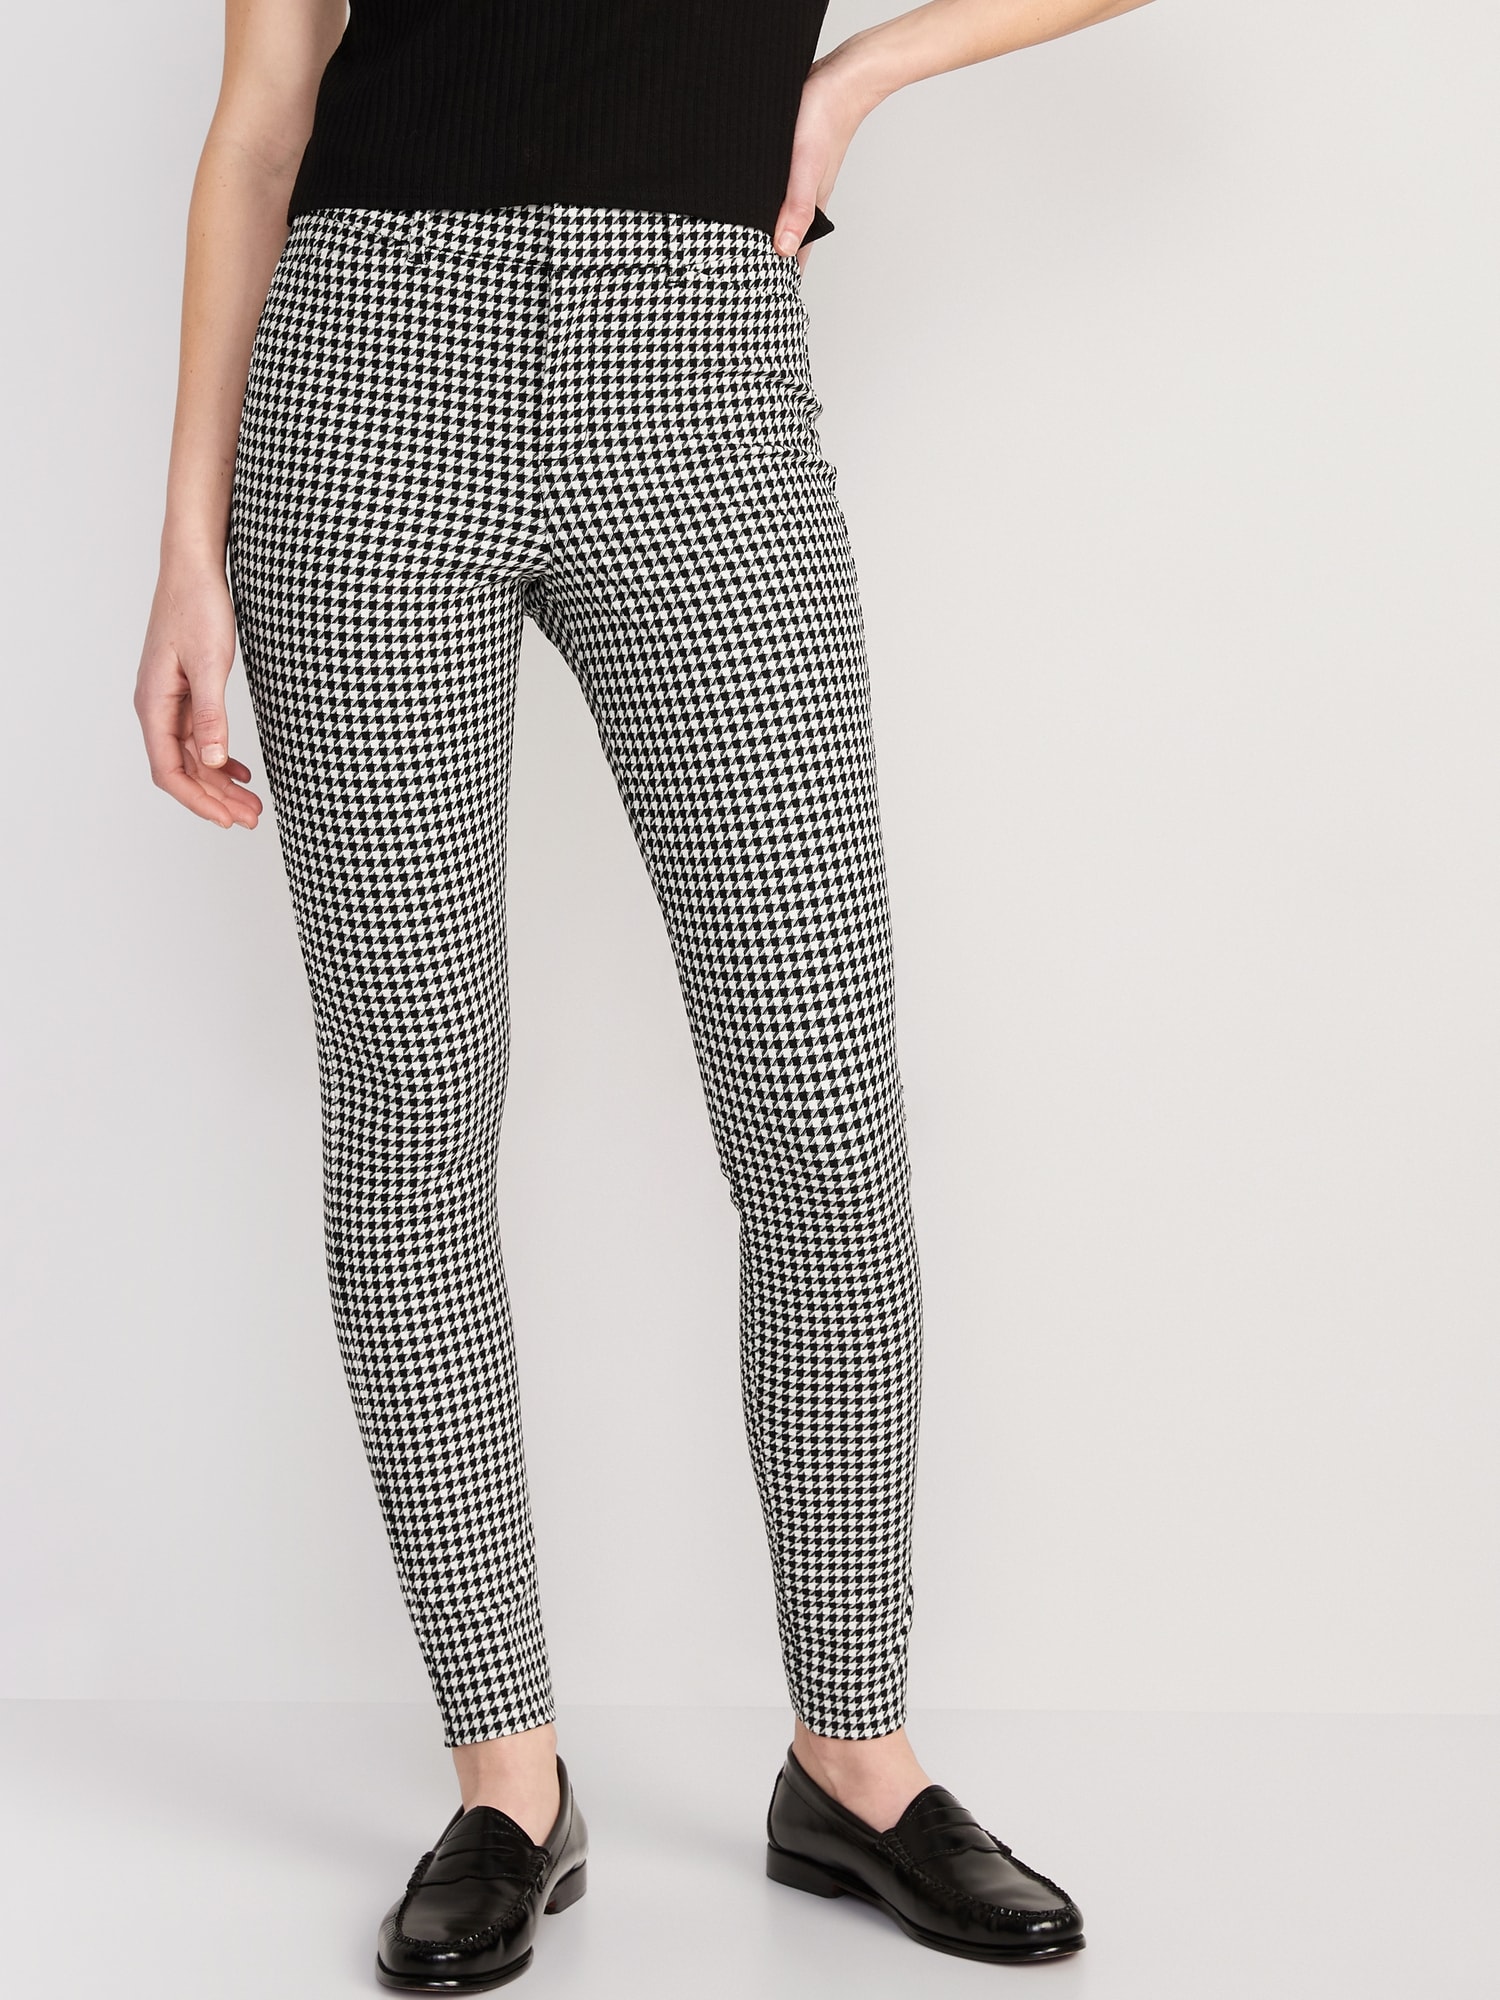 High-Waisted Pixie Skinny Pants for Women